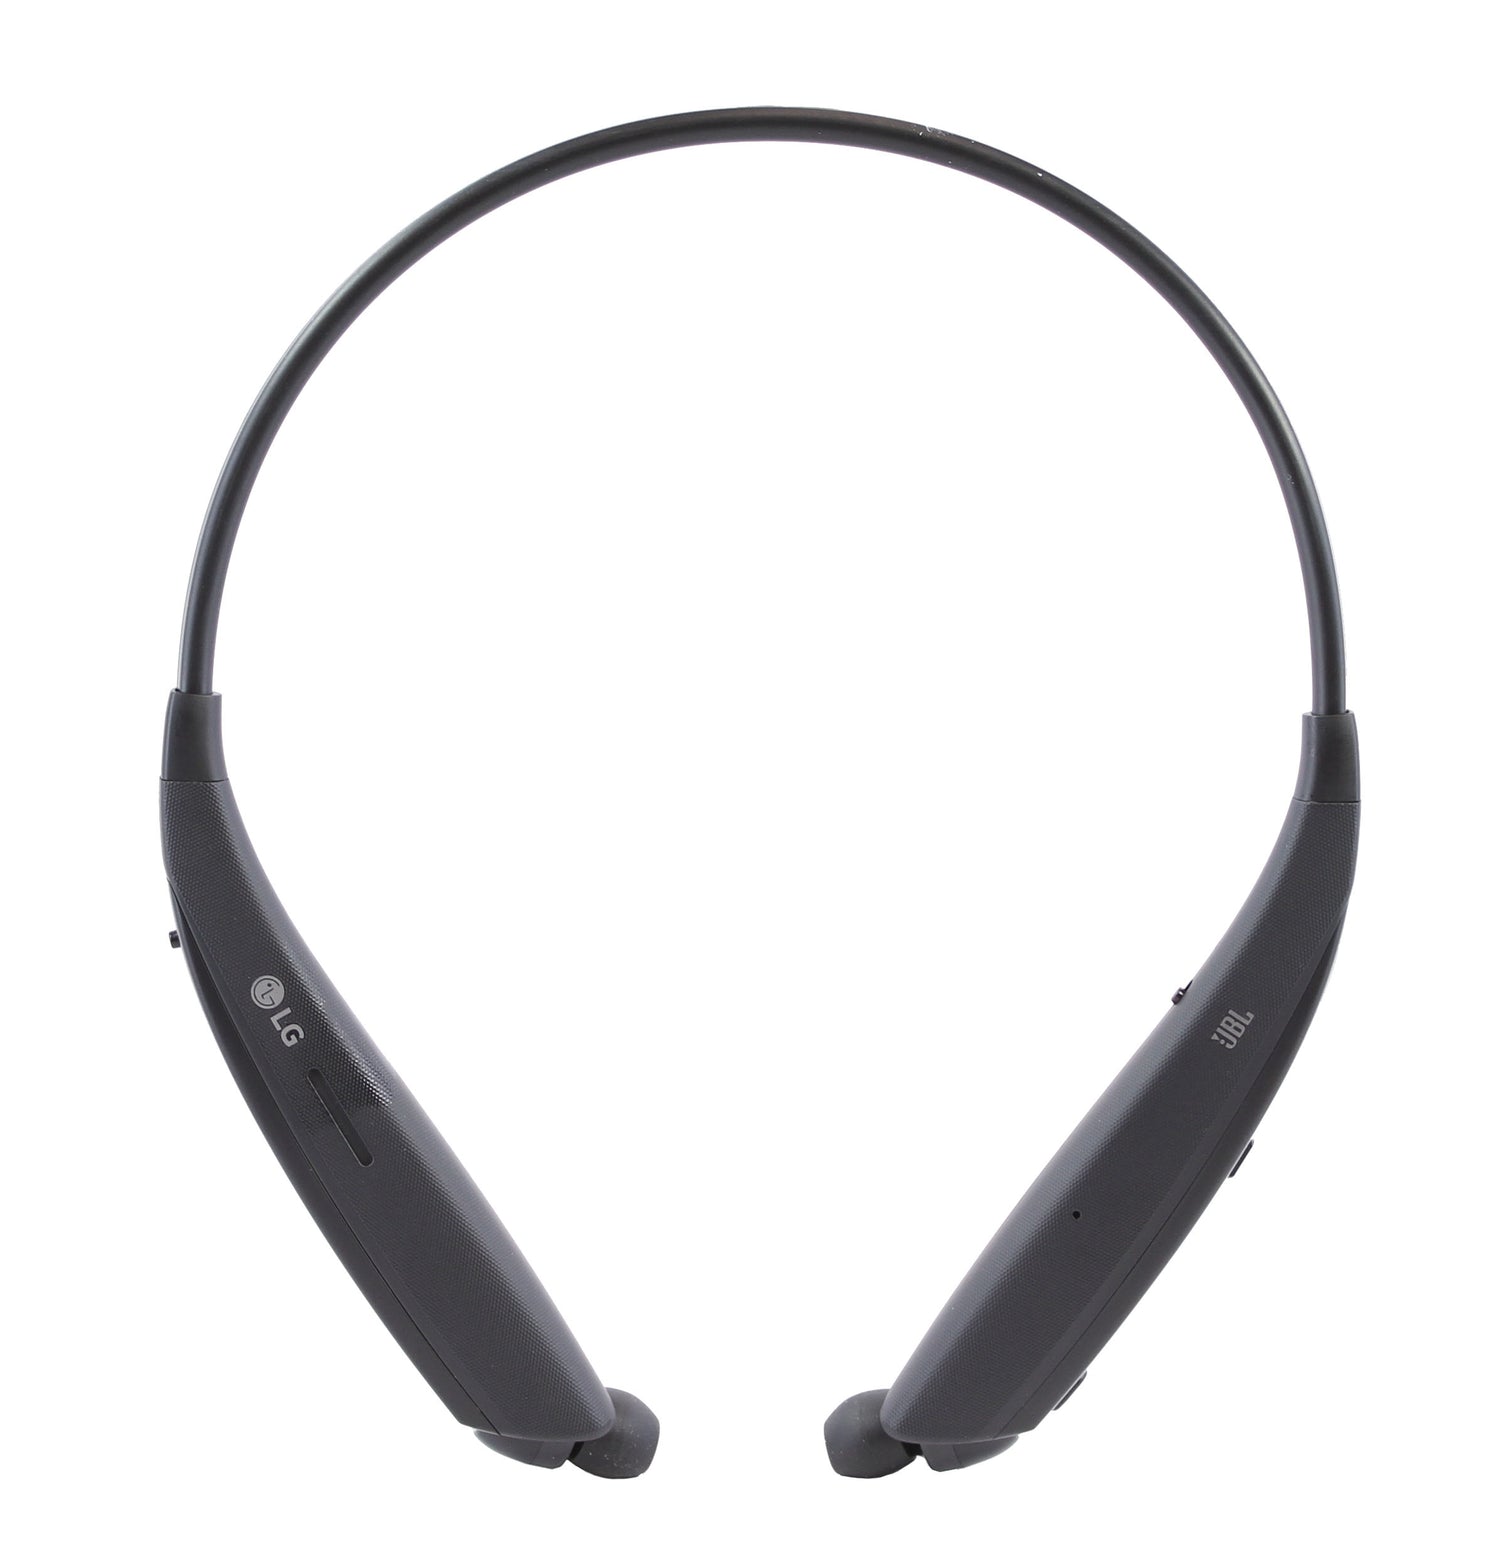 LG TONE Ultra SE Bluetooth Wireless Stereo Headset  - Black (Pre-Owned)